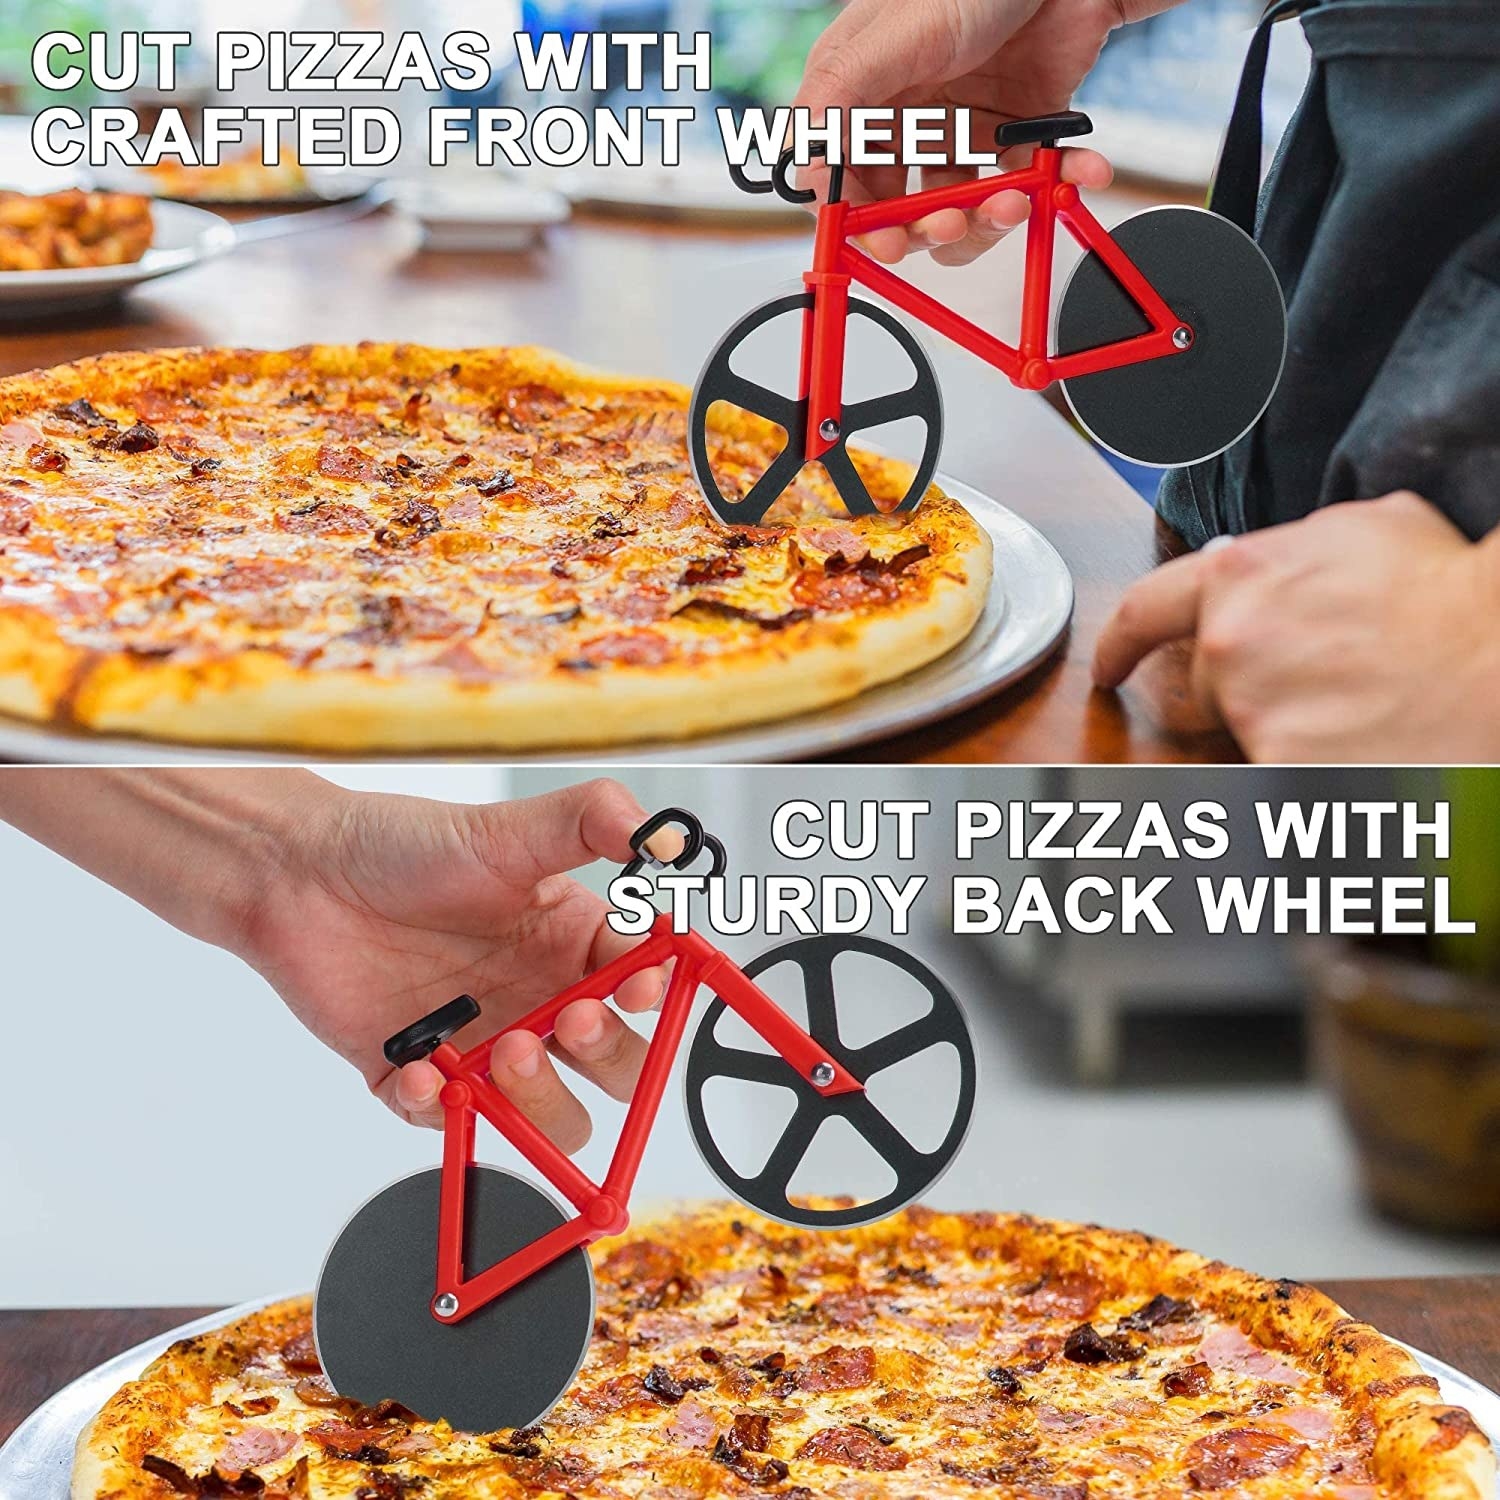 a bicycle shaped pizza cutter being used to cut pizza